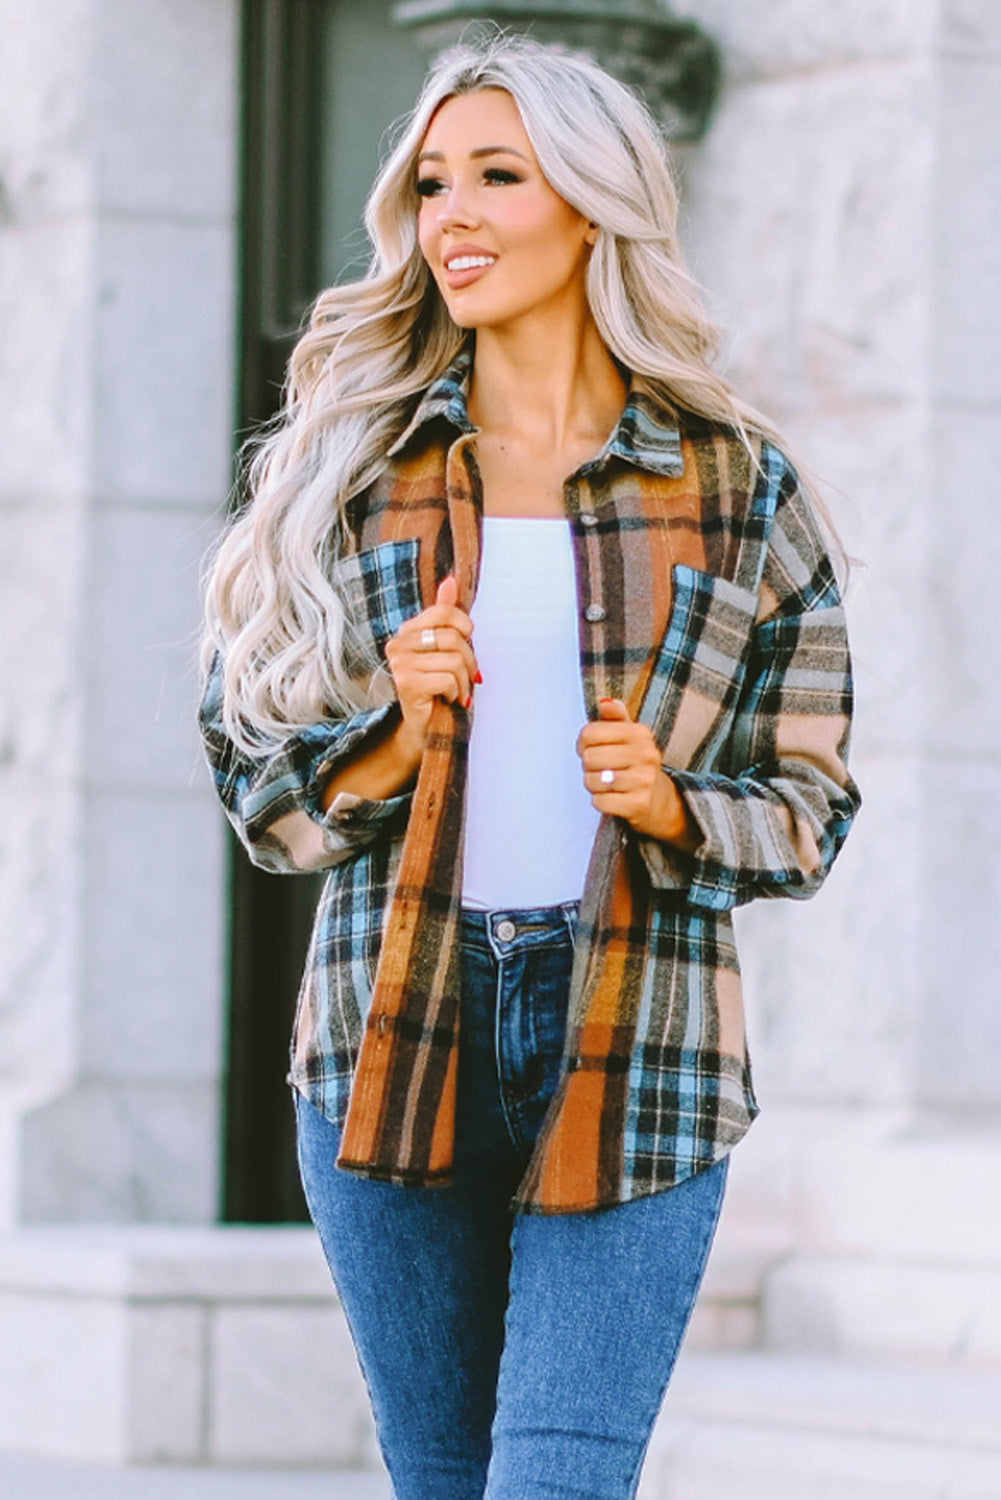 Brown Plaid Color Block Buttoned Shirt with Pockets